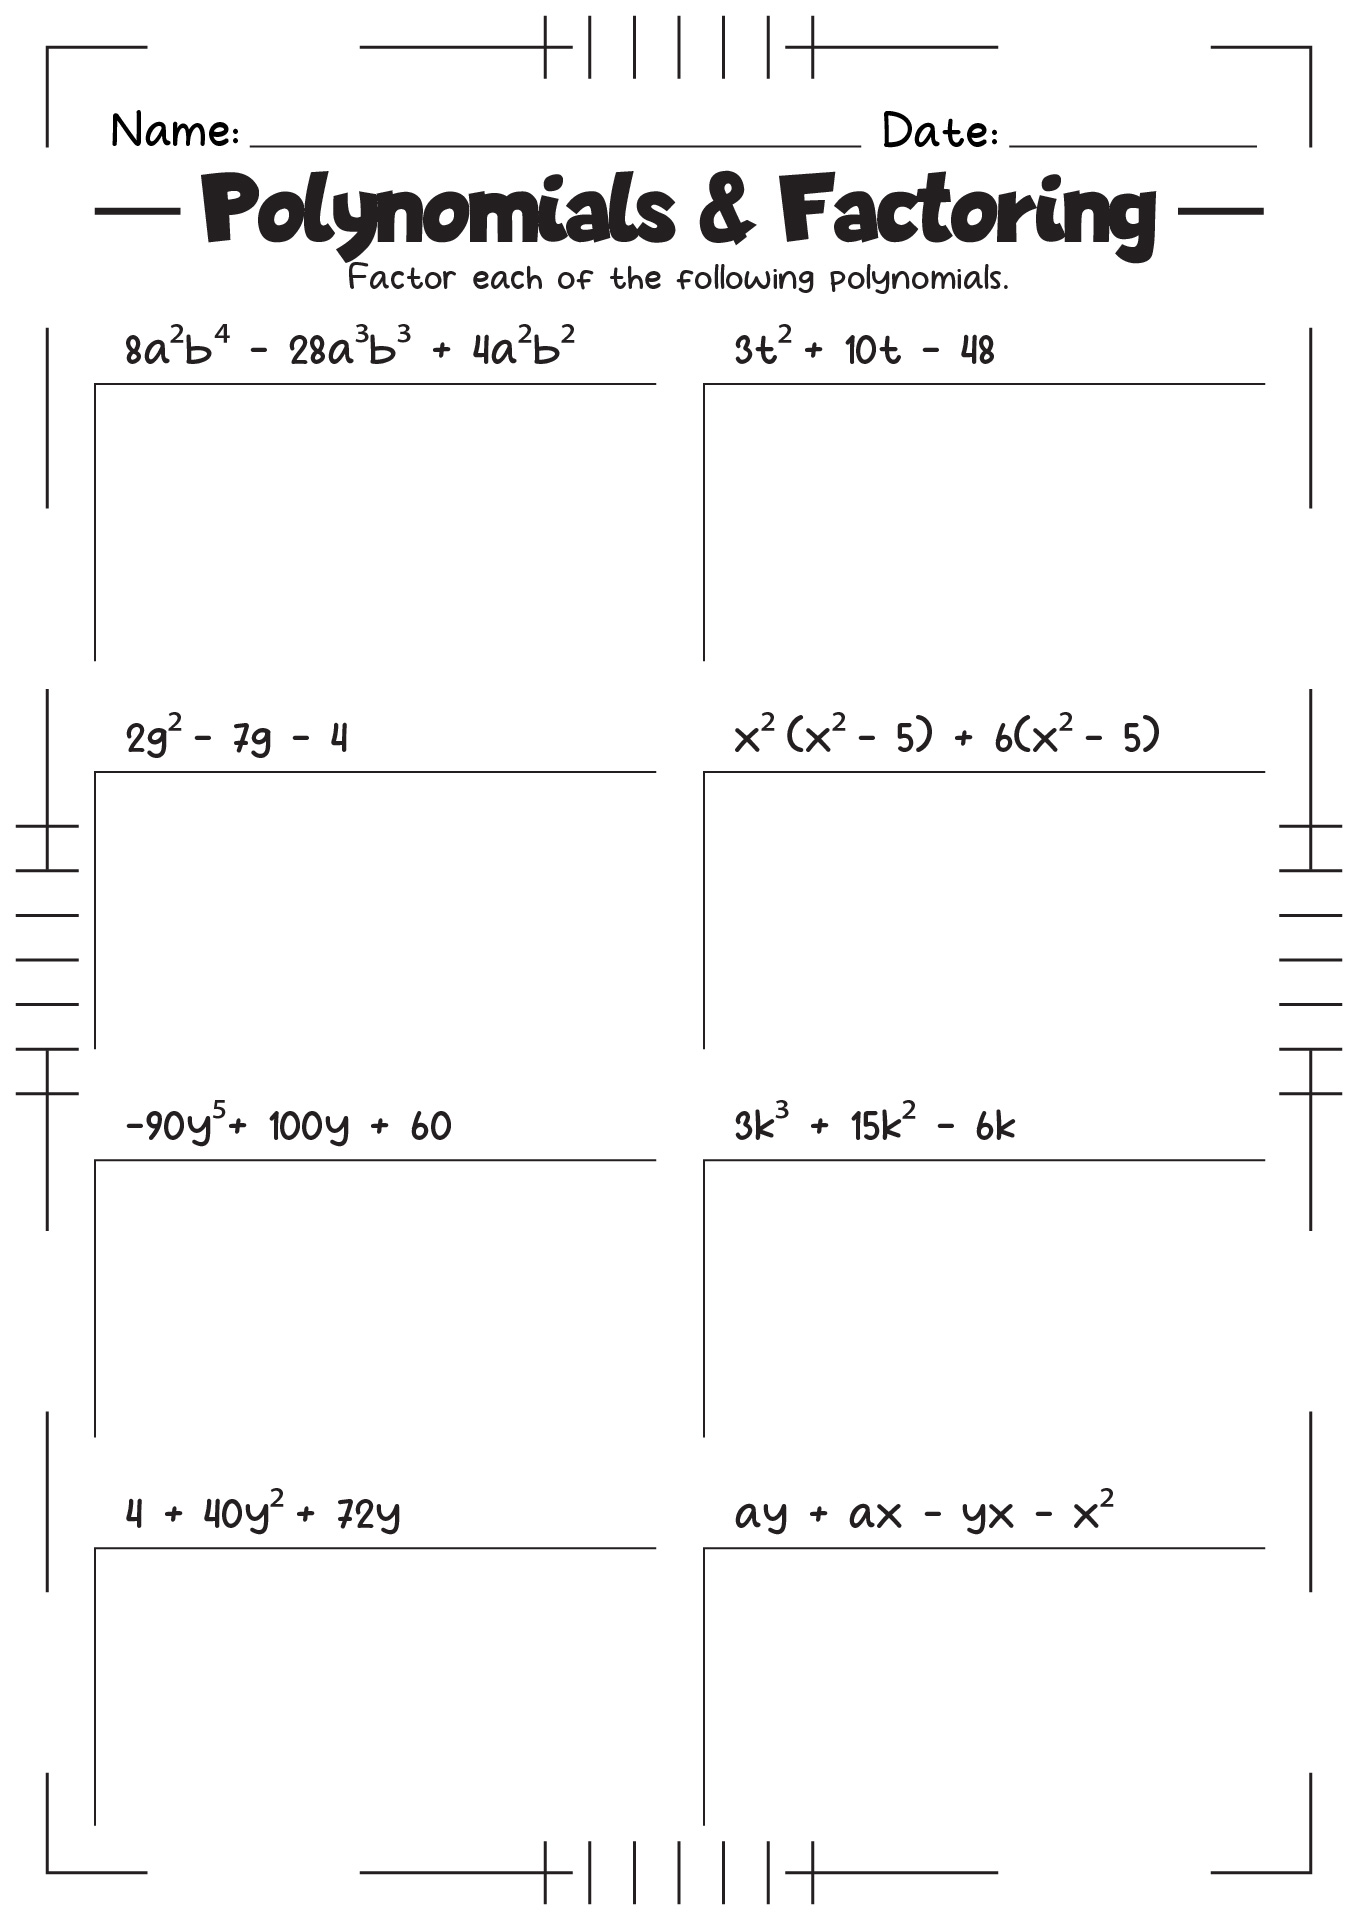 Polynomials and Factoring Practice Worksheet Answers